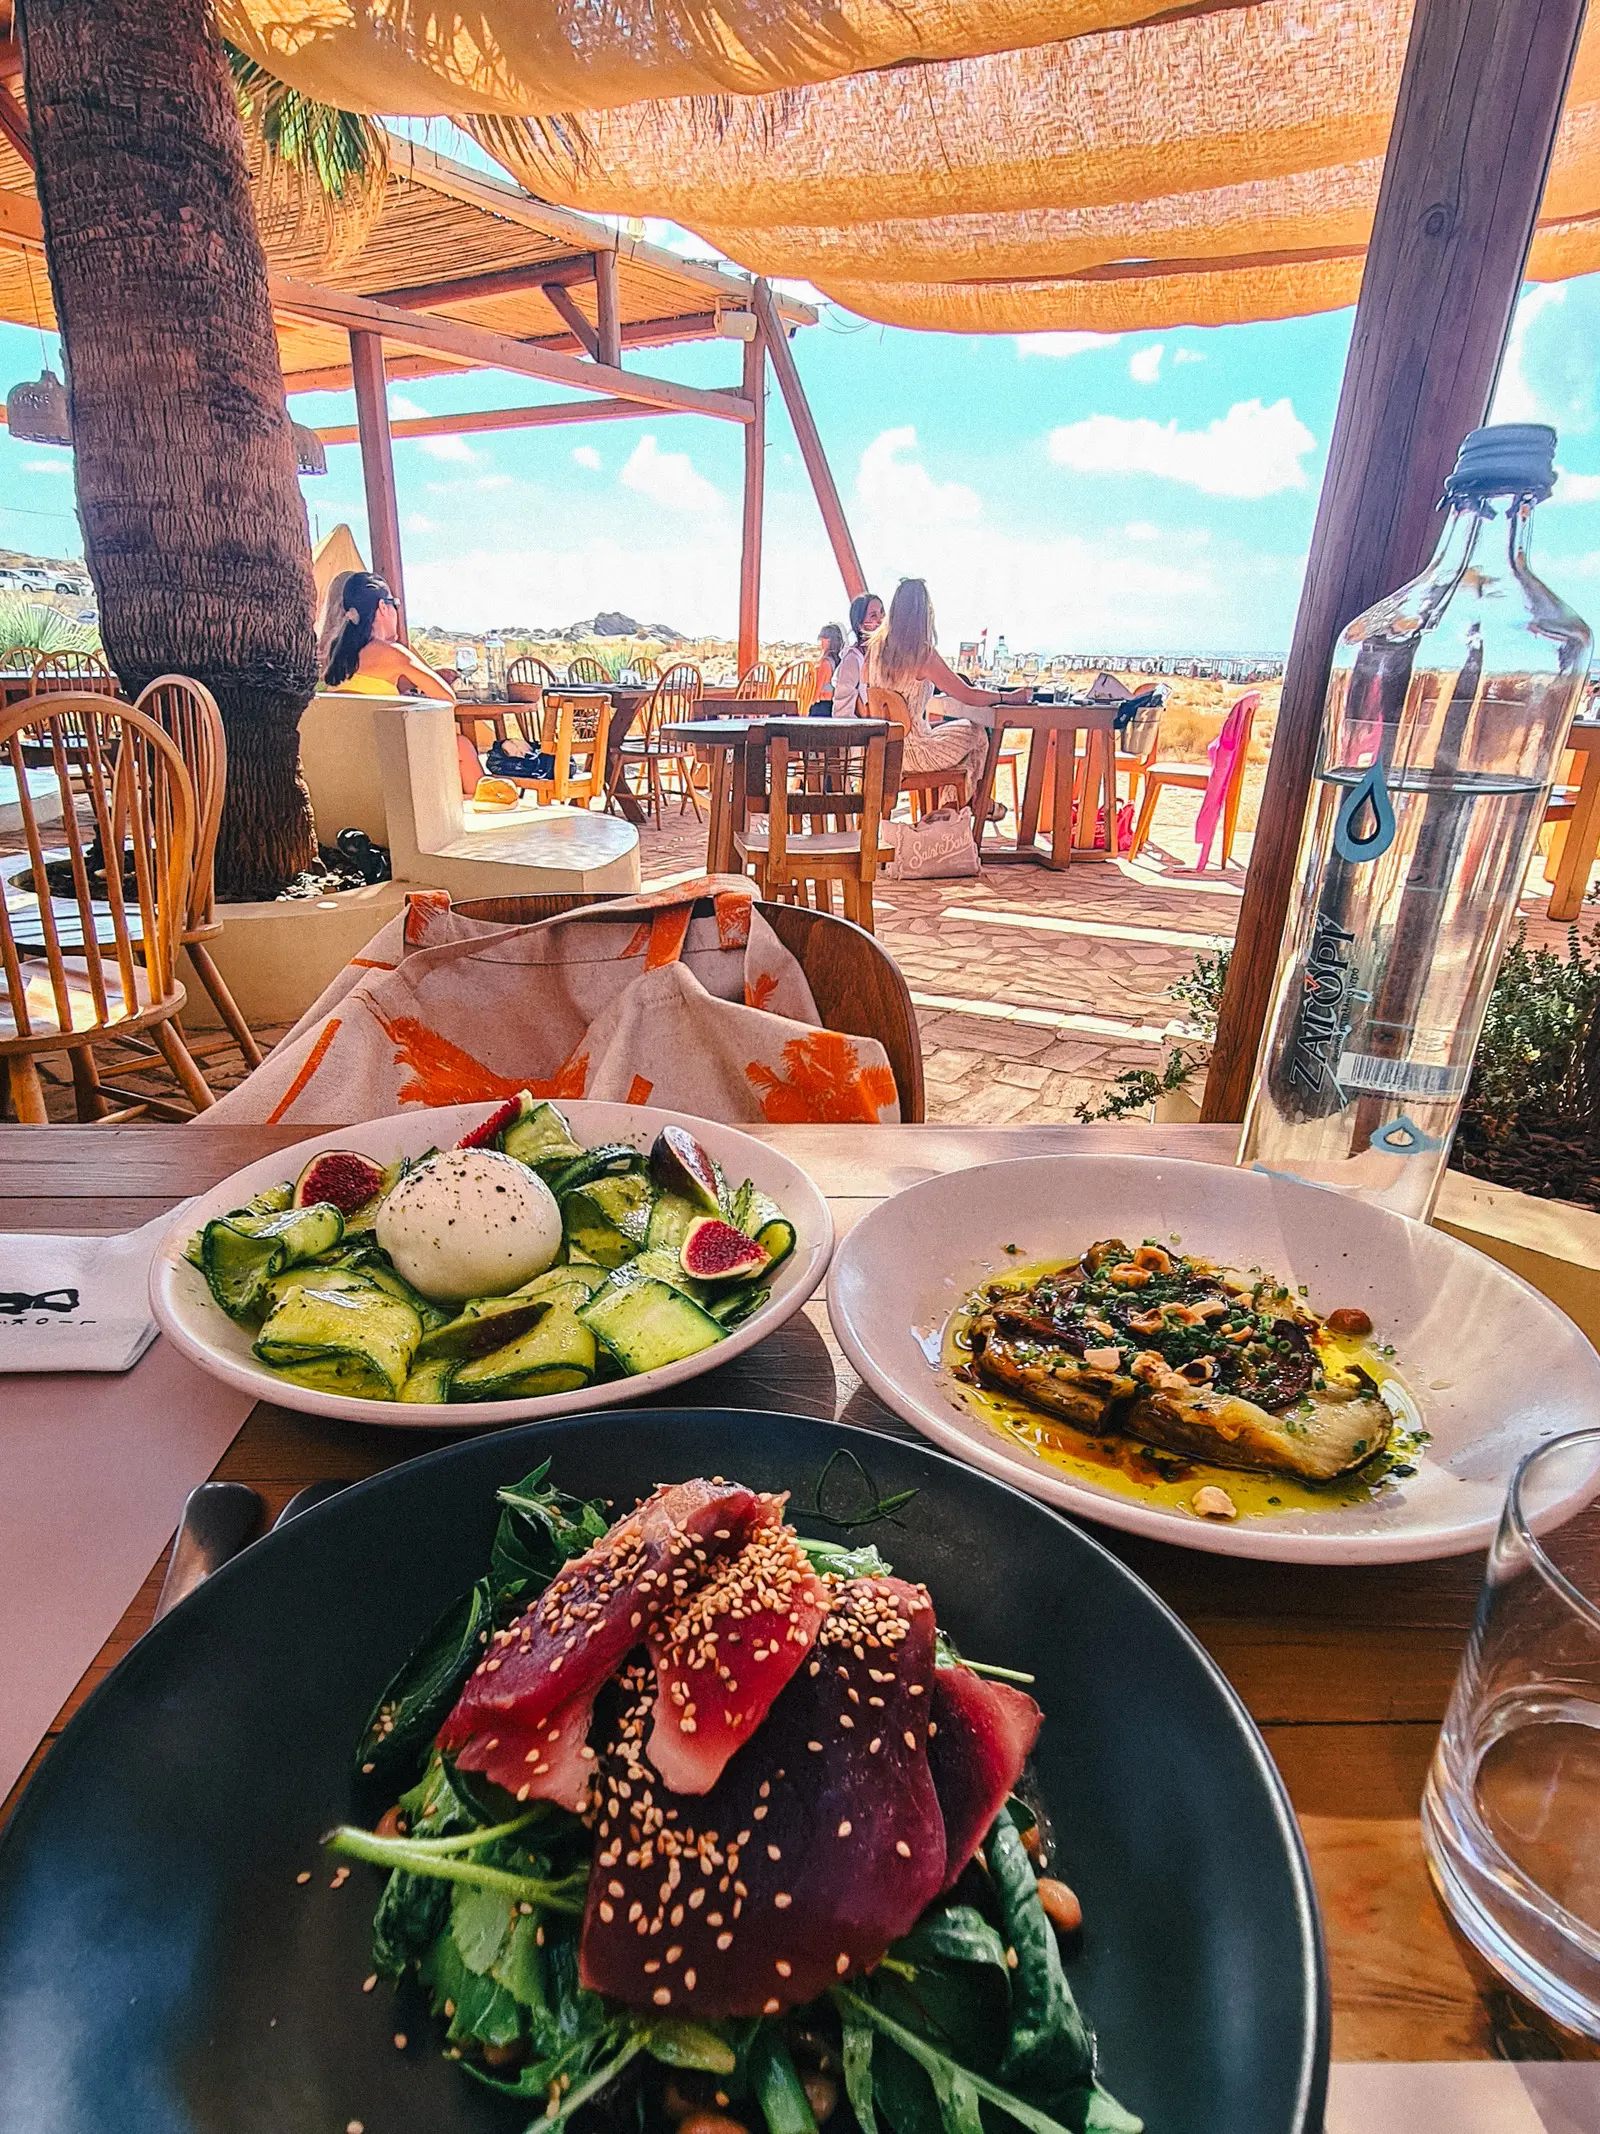 Tuna filet on greens on a black plate, white plate with zucchini salad and burrata, white plate with eggplant on a table in Liokalyvo Beach House Taverna at Falassarna Beach.